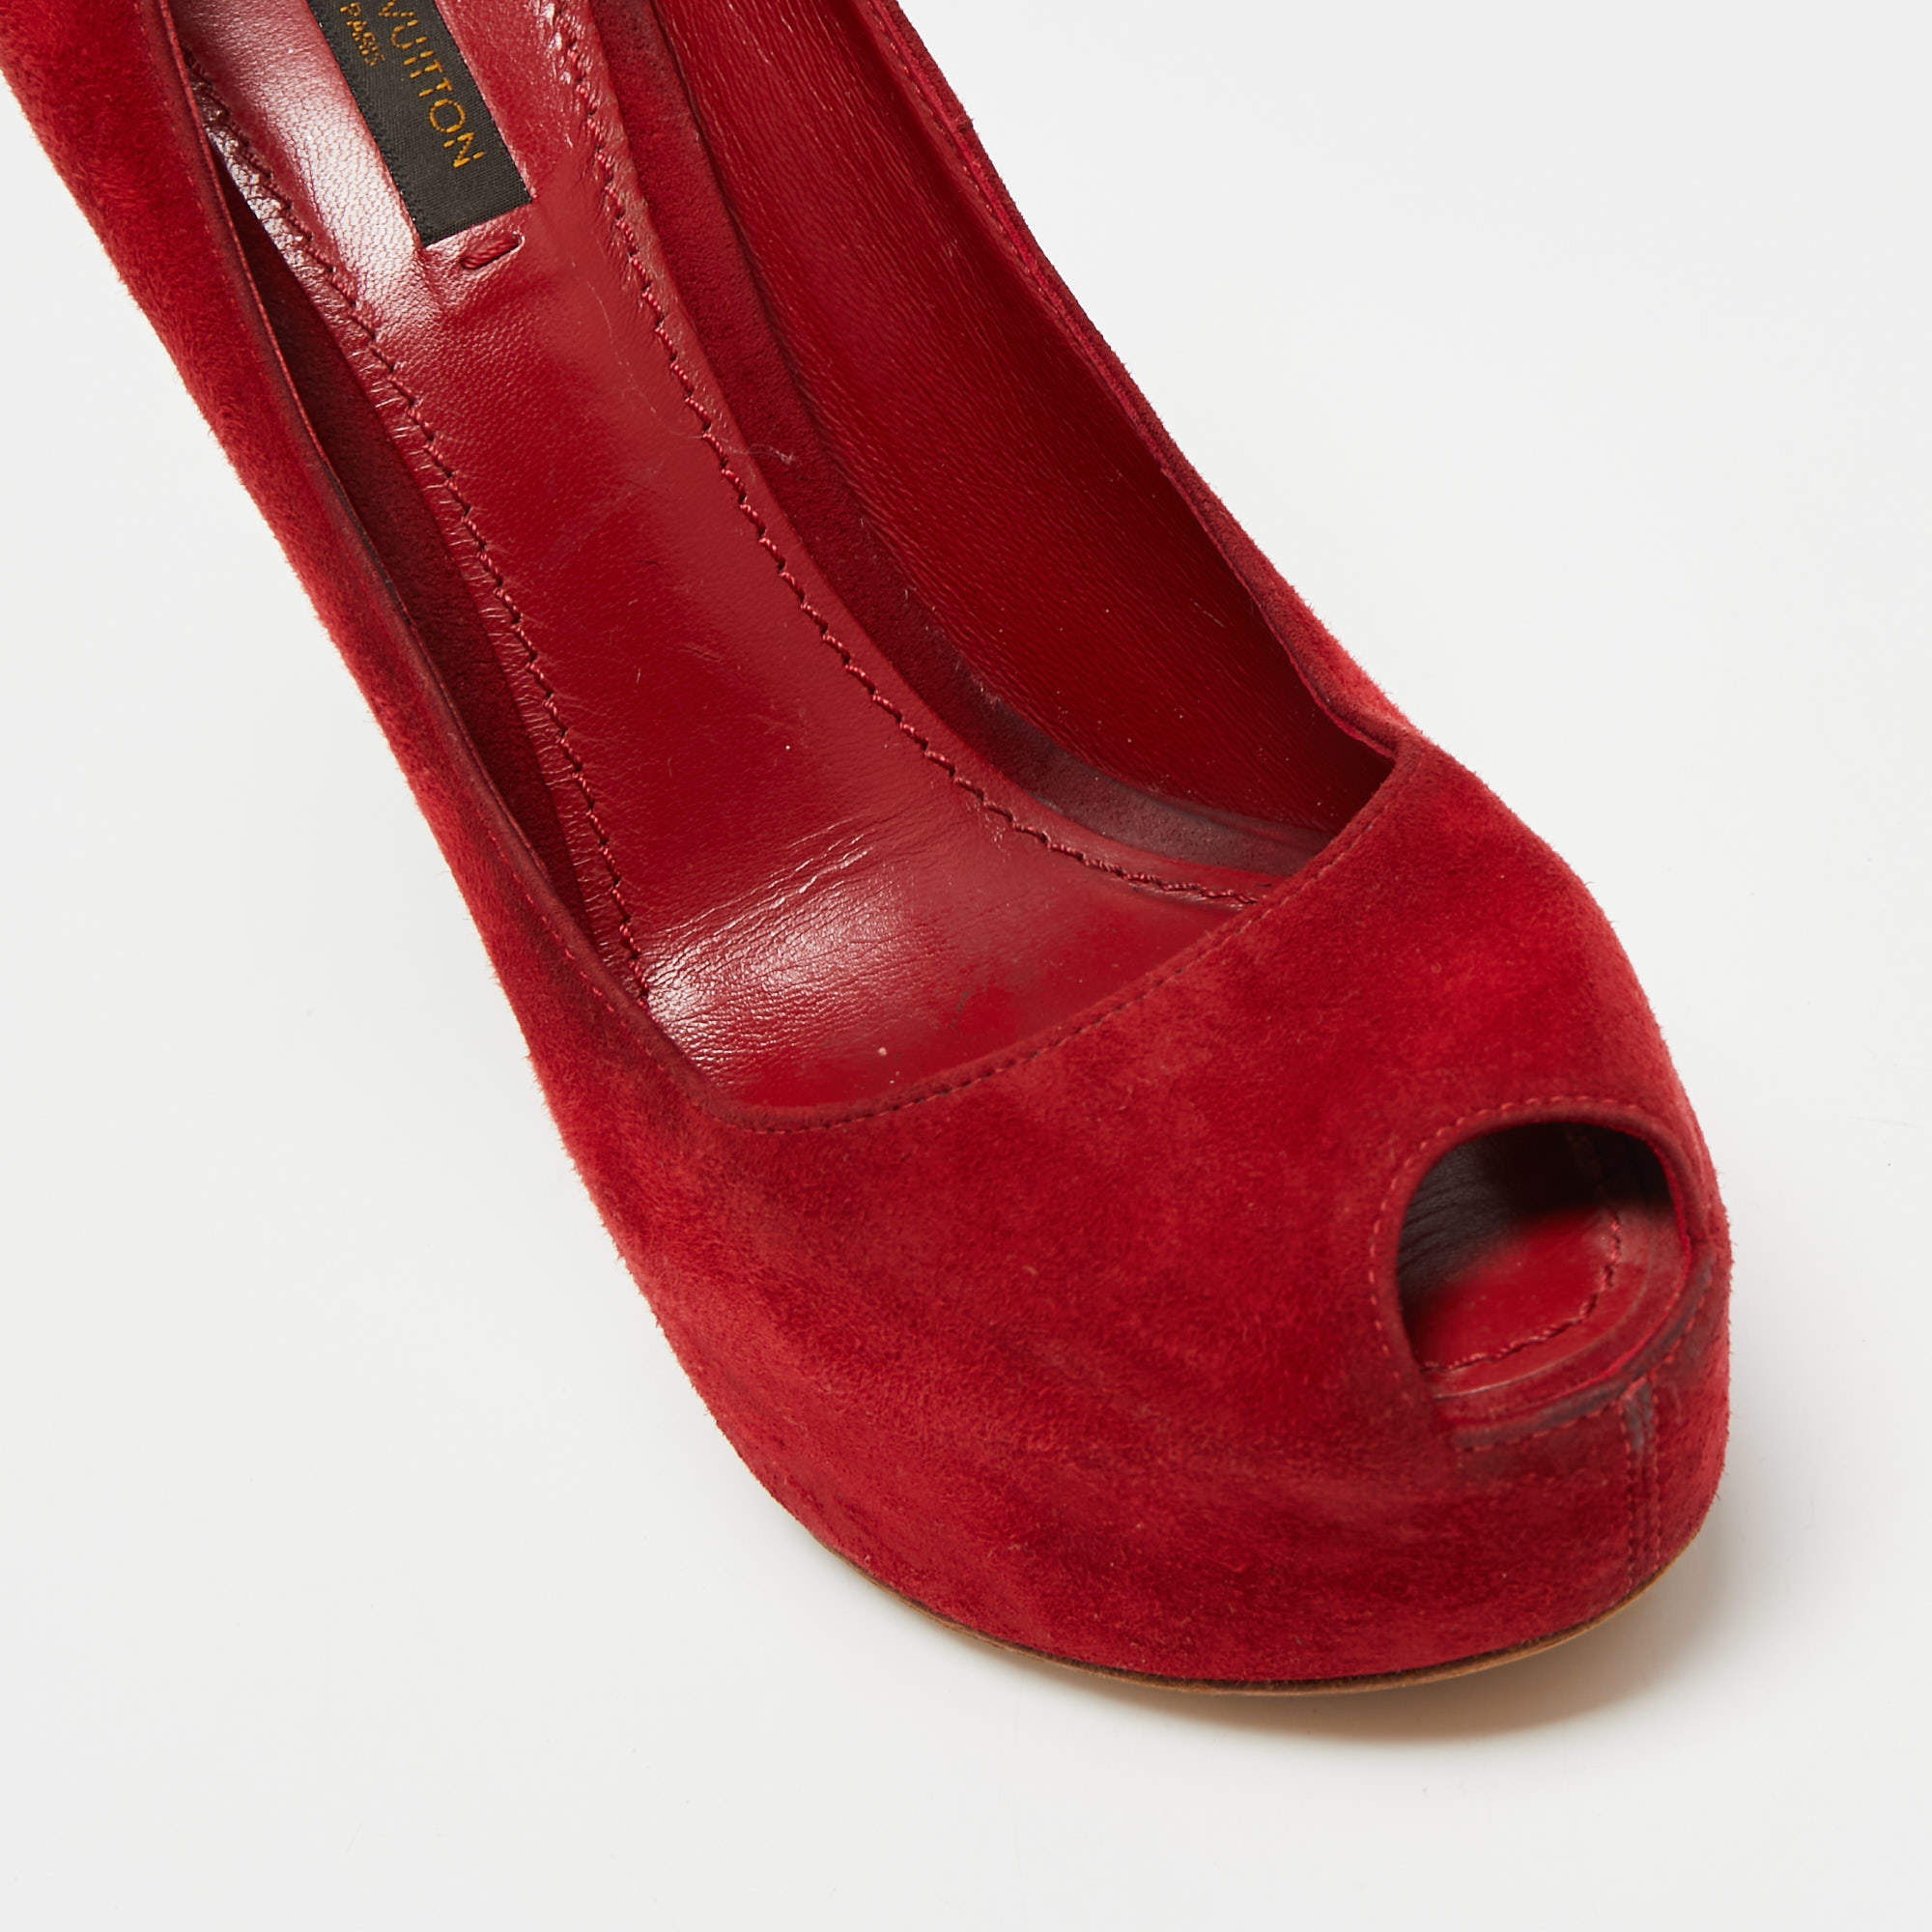 Louis Vuitton Red Suede Oh Really! Peep-Toe Pumps Size 38 Louis Vuitton